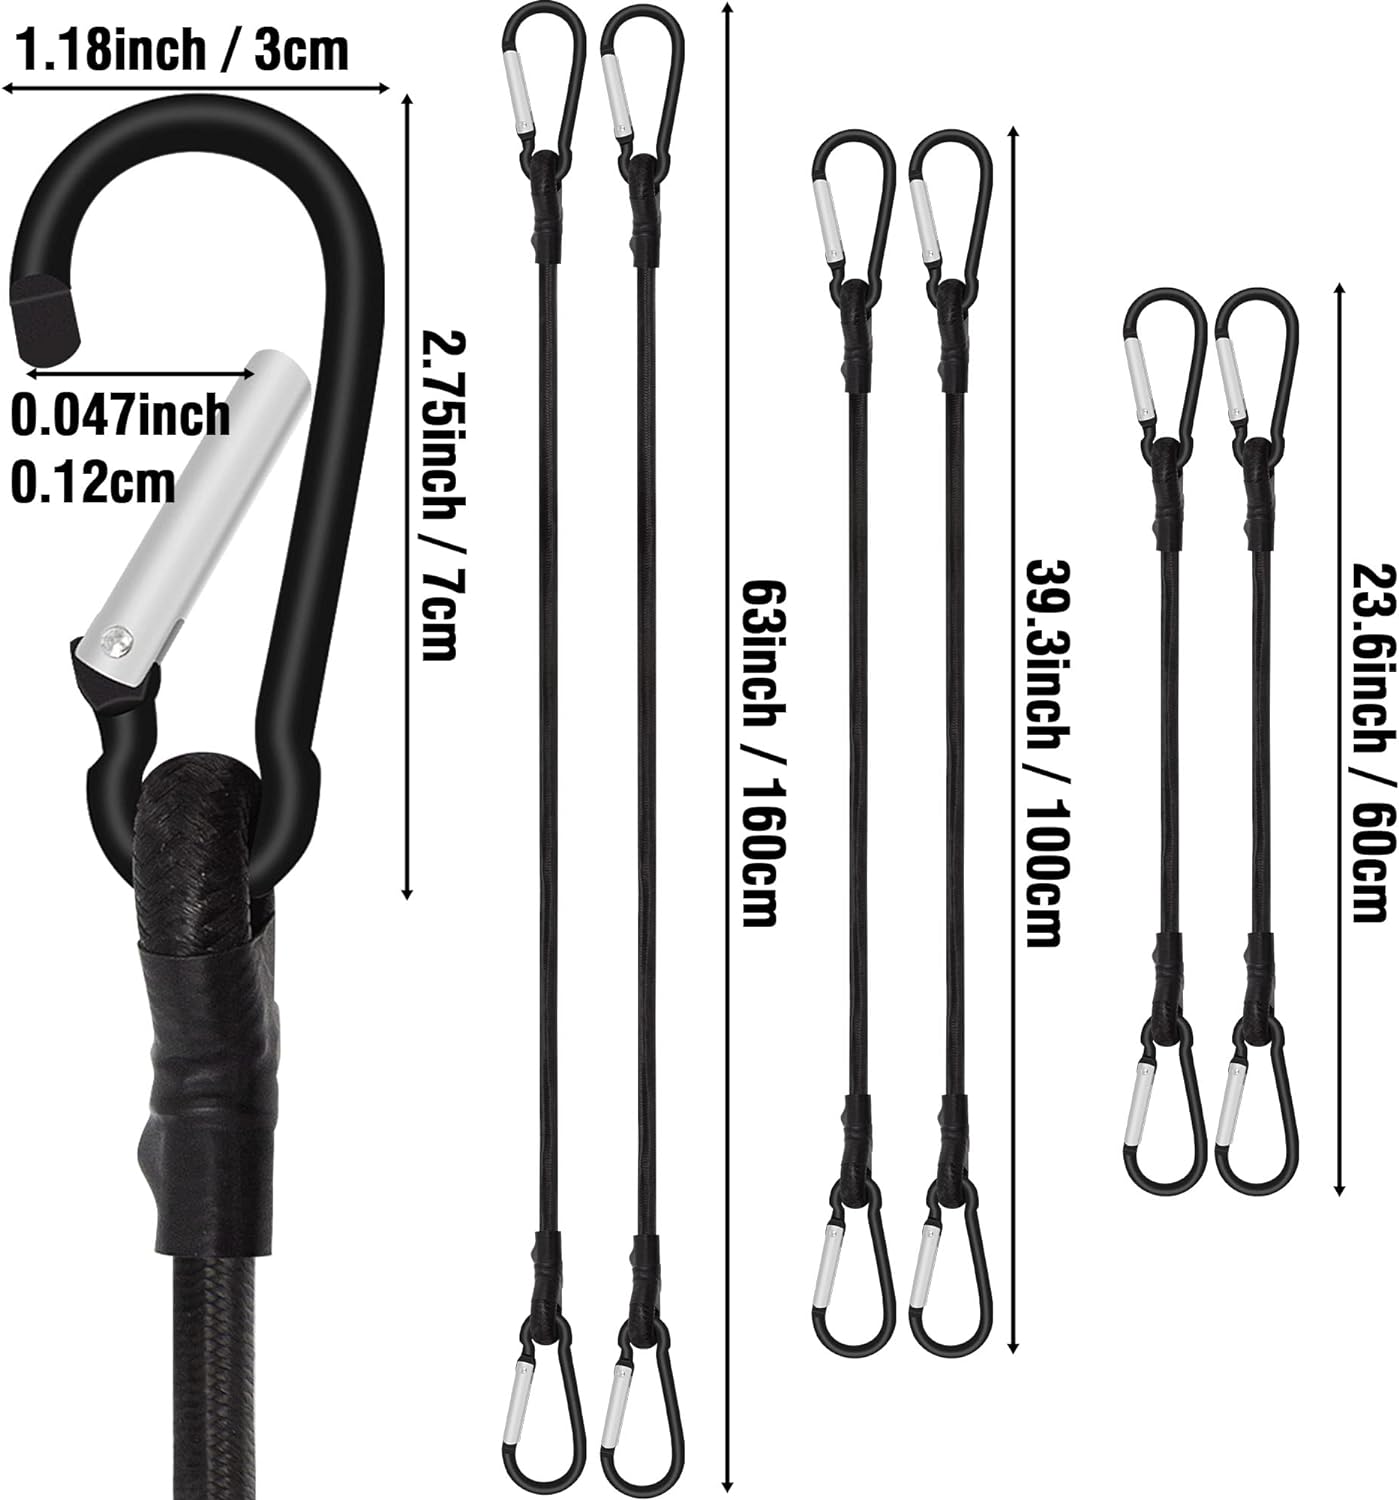 Rugtol Bungee Cords with Carabiner, 6 Pack Long Heavy Duty Carabiner Bungee Cord Assorted Size 24" 40" 60", Extra Stron